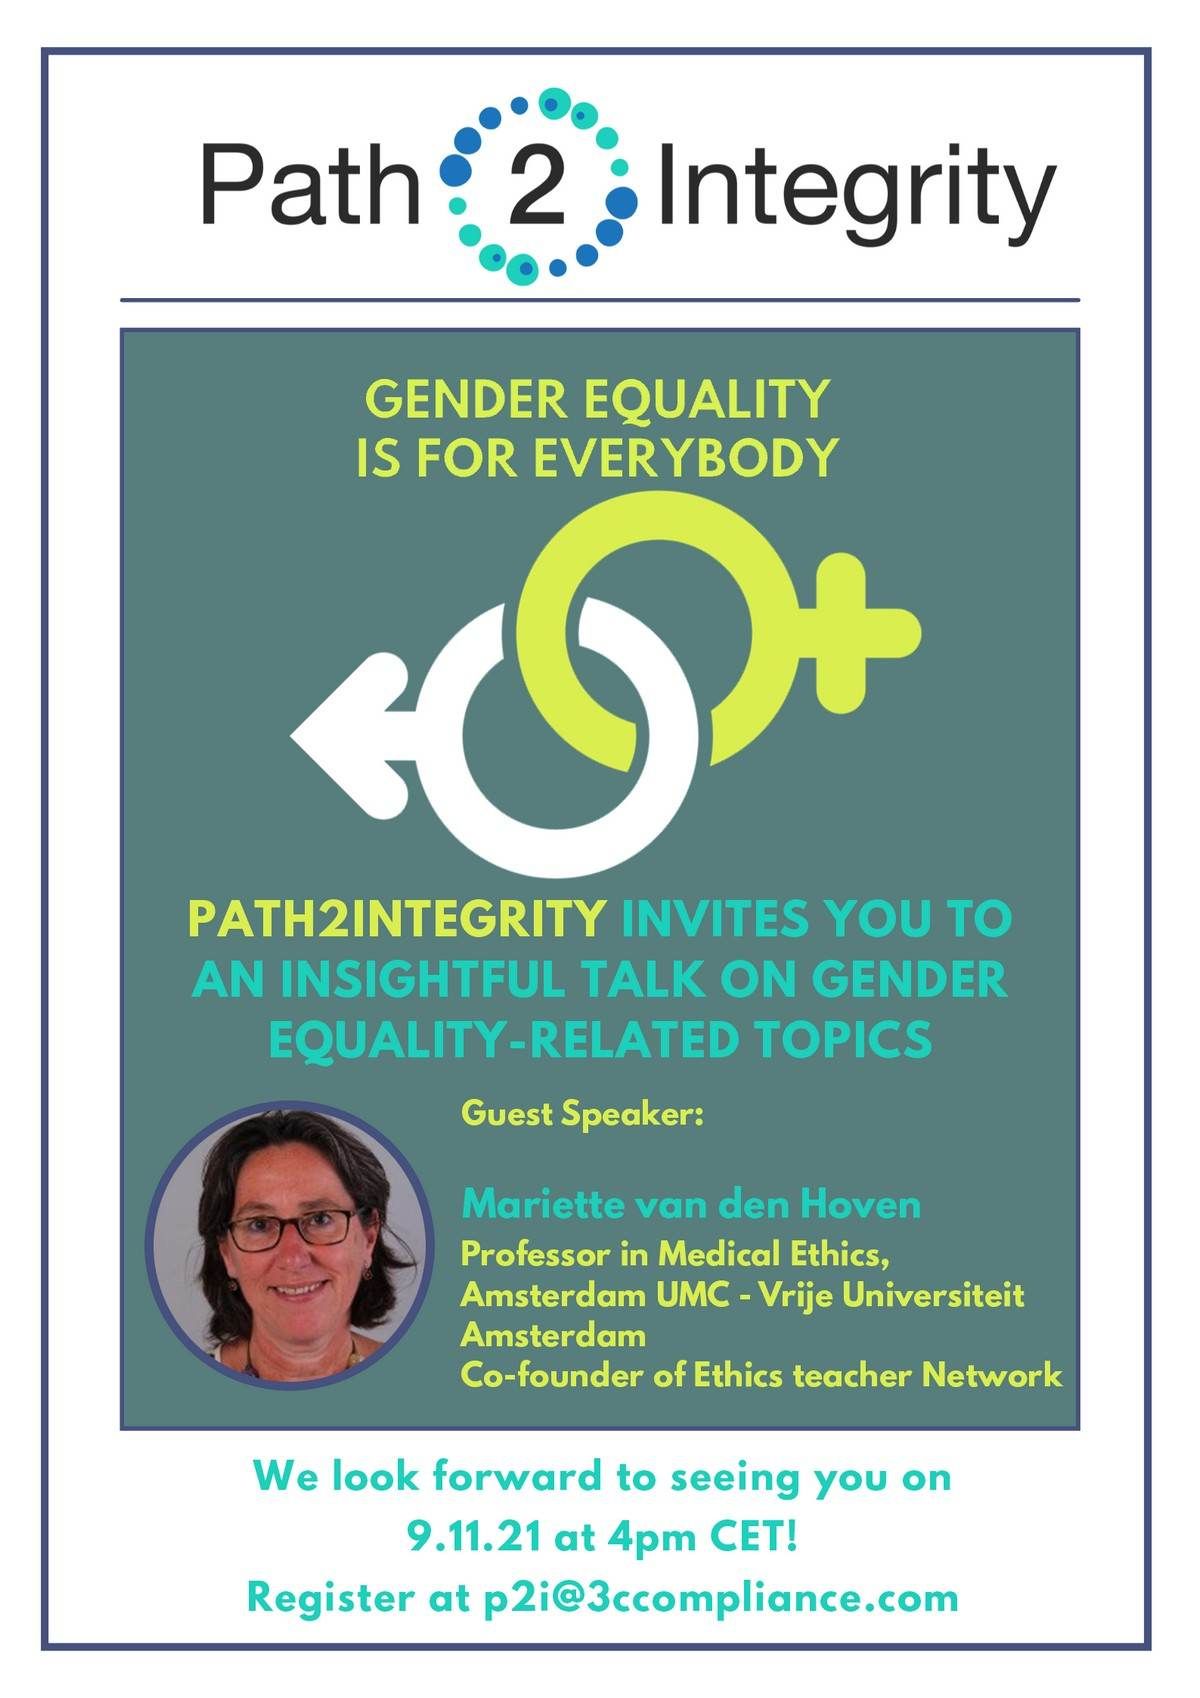 Talk on gender equality-related topics in research